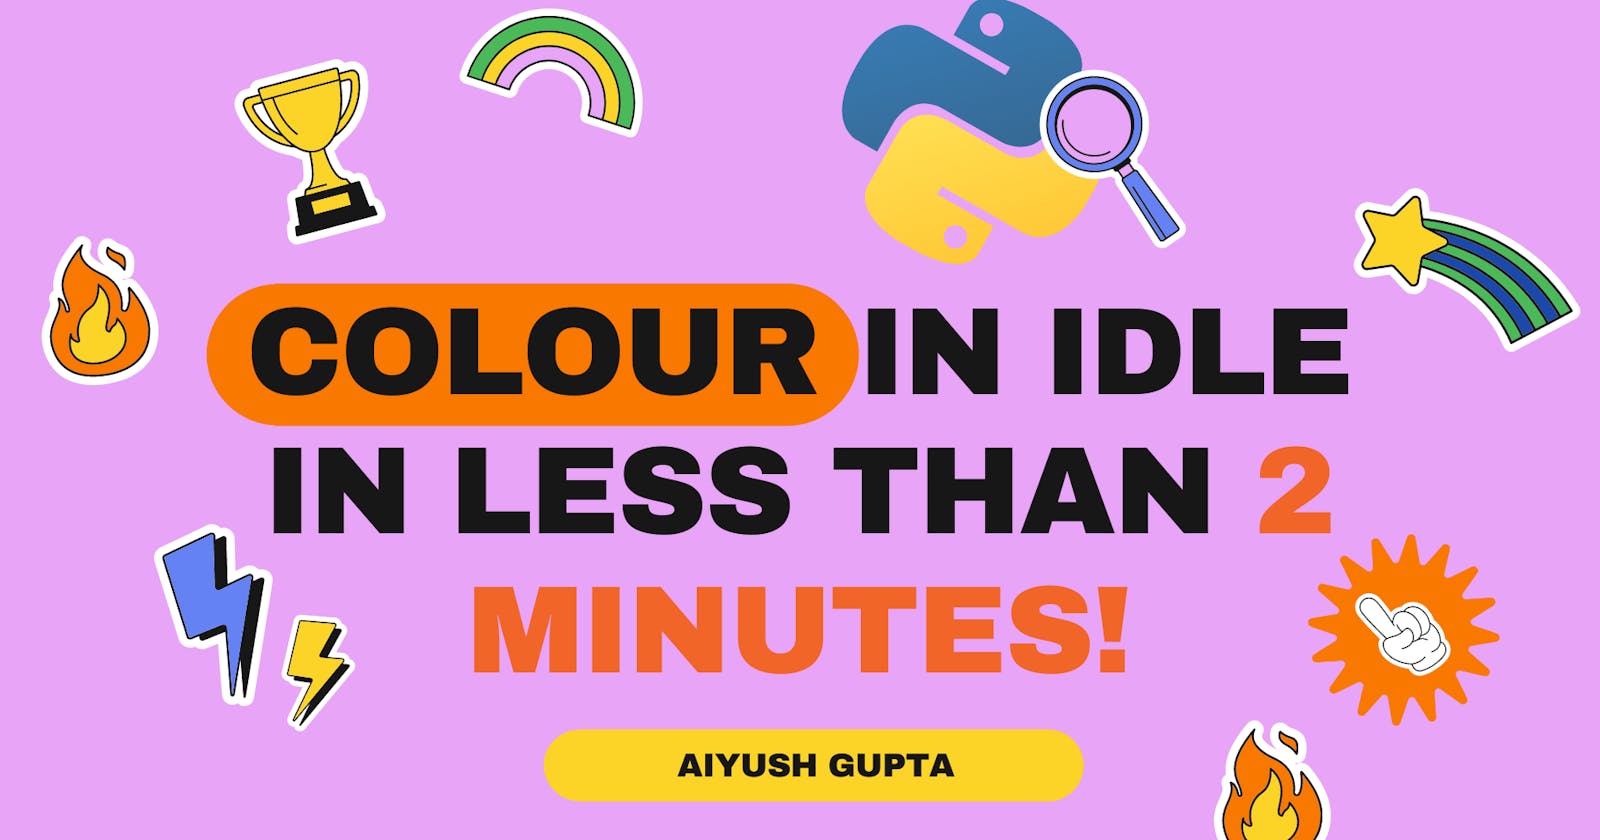 Printing COLOUR in IDLE in less than 2 minutes!